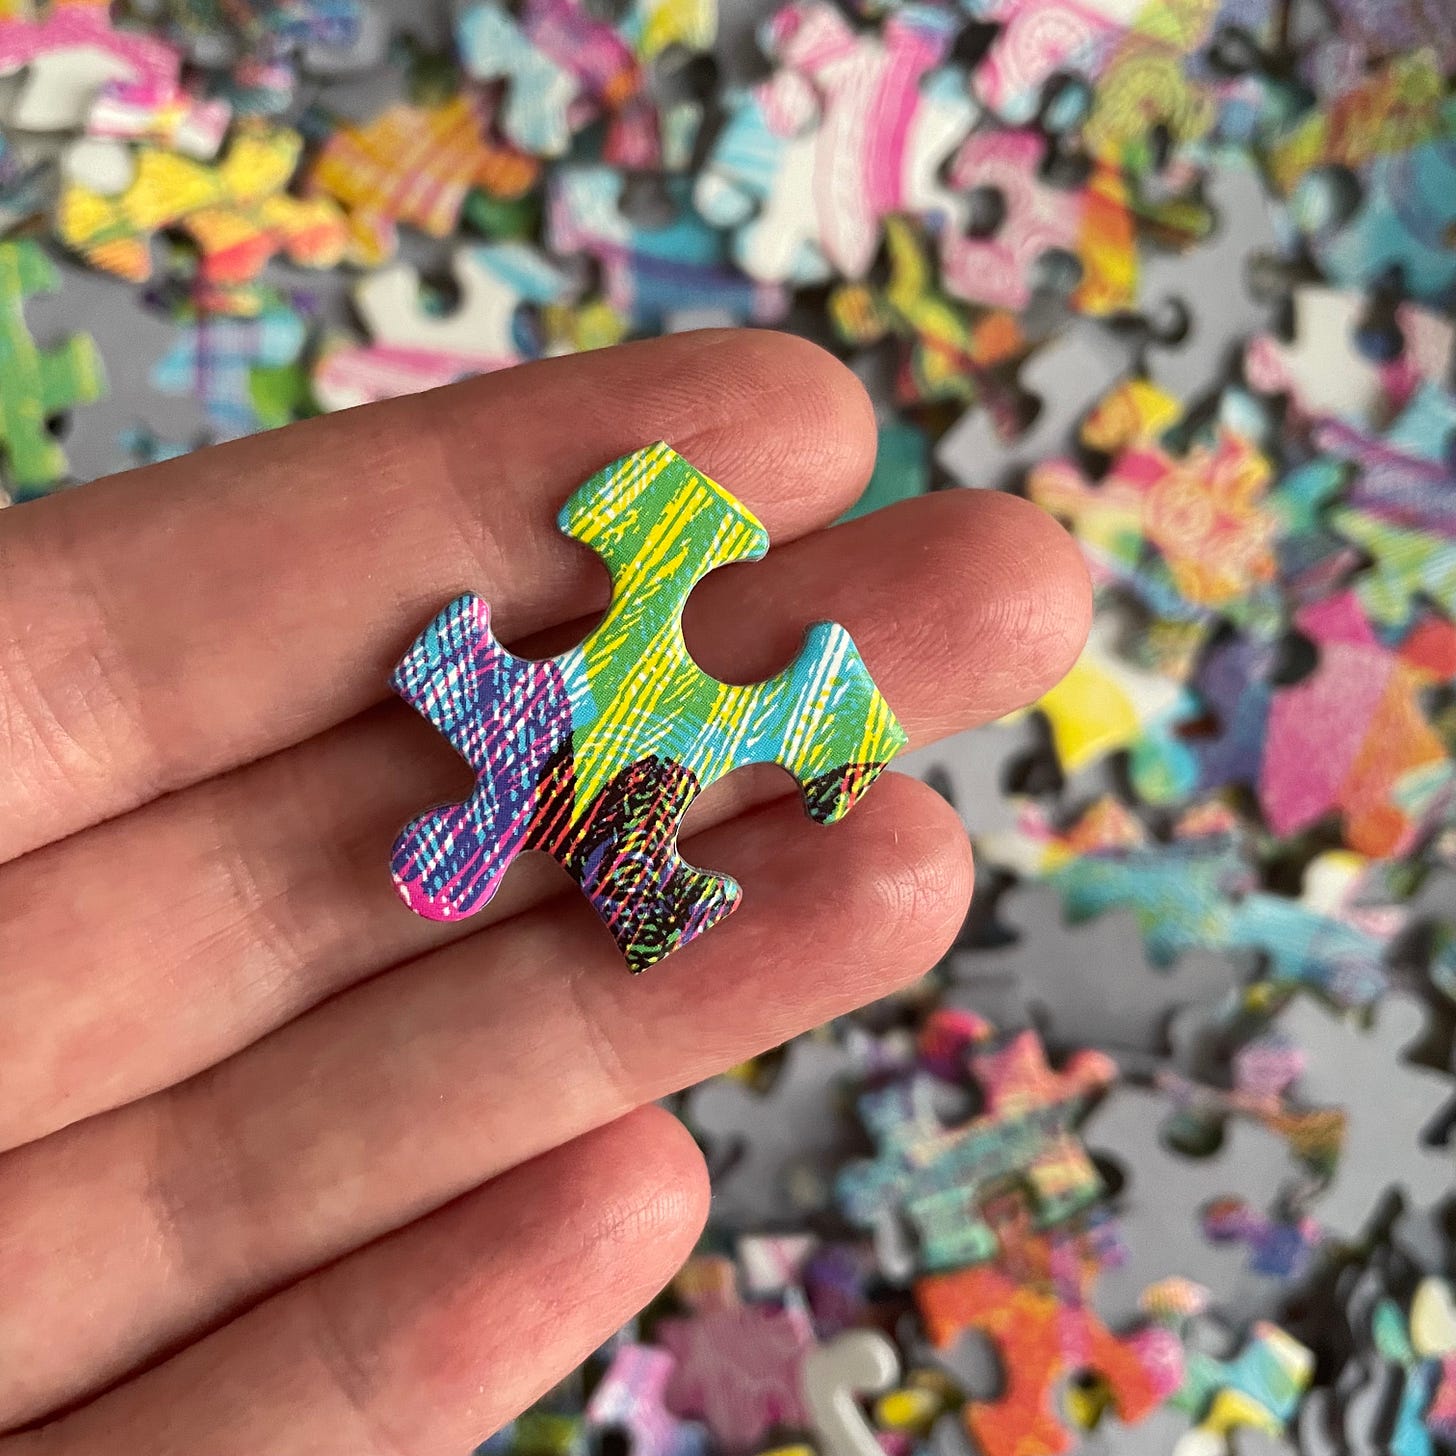 Photo of a colorful jigsaw puzzle piece on a hand, in front of a dense background of many puzzle pieces.